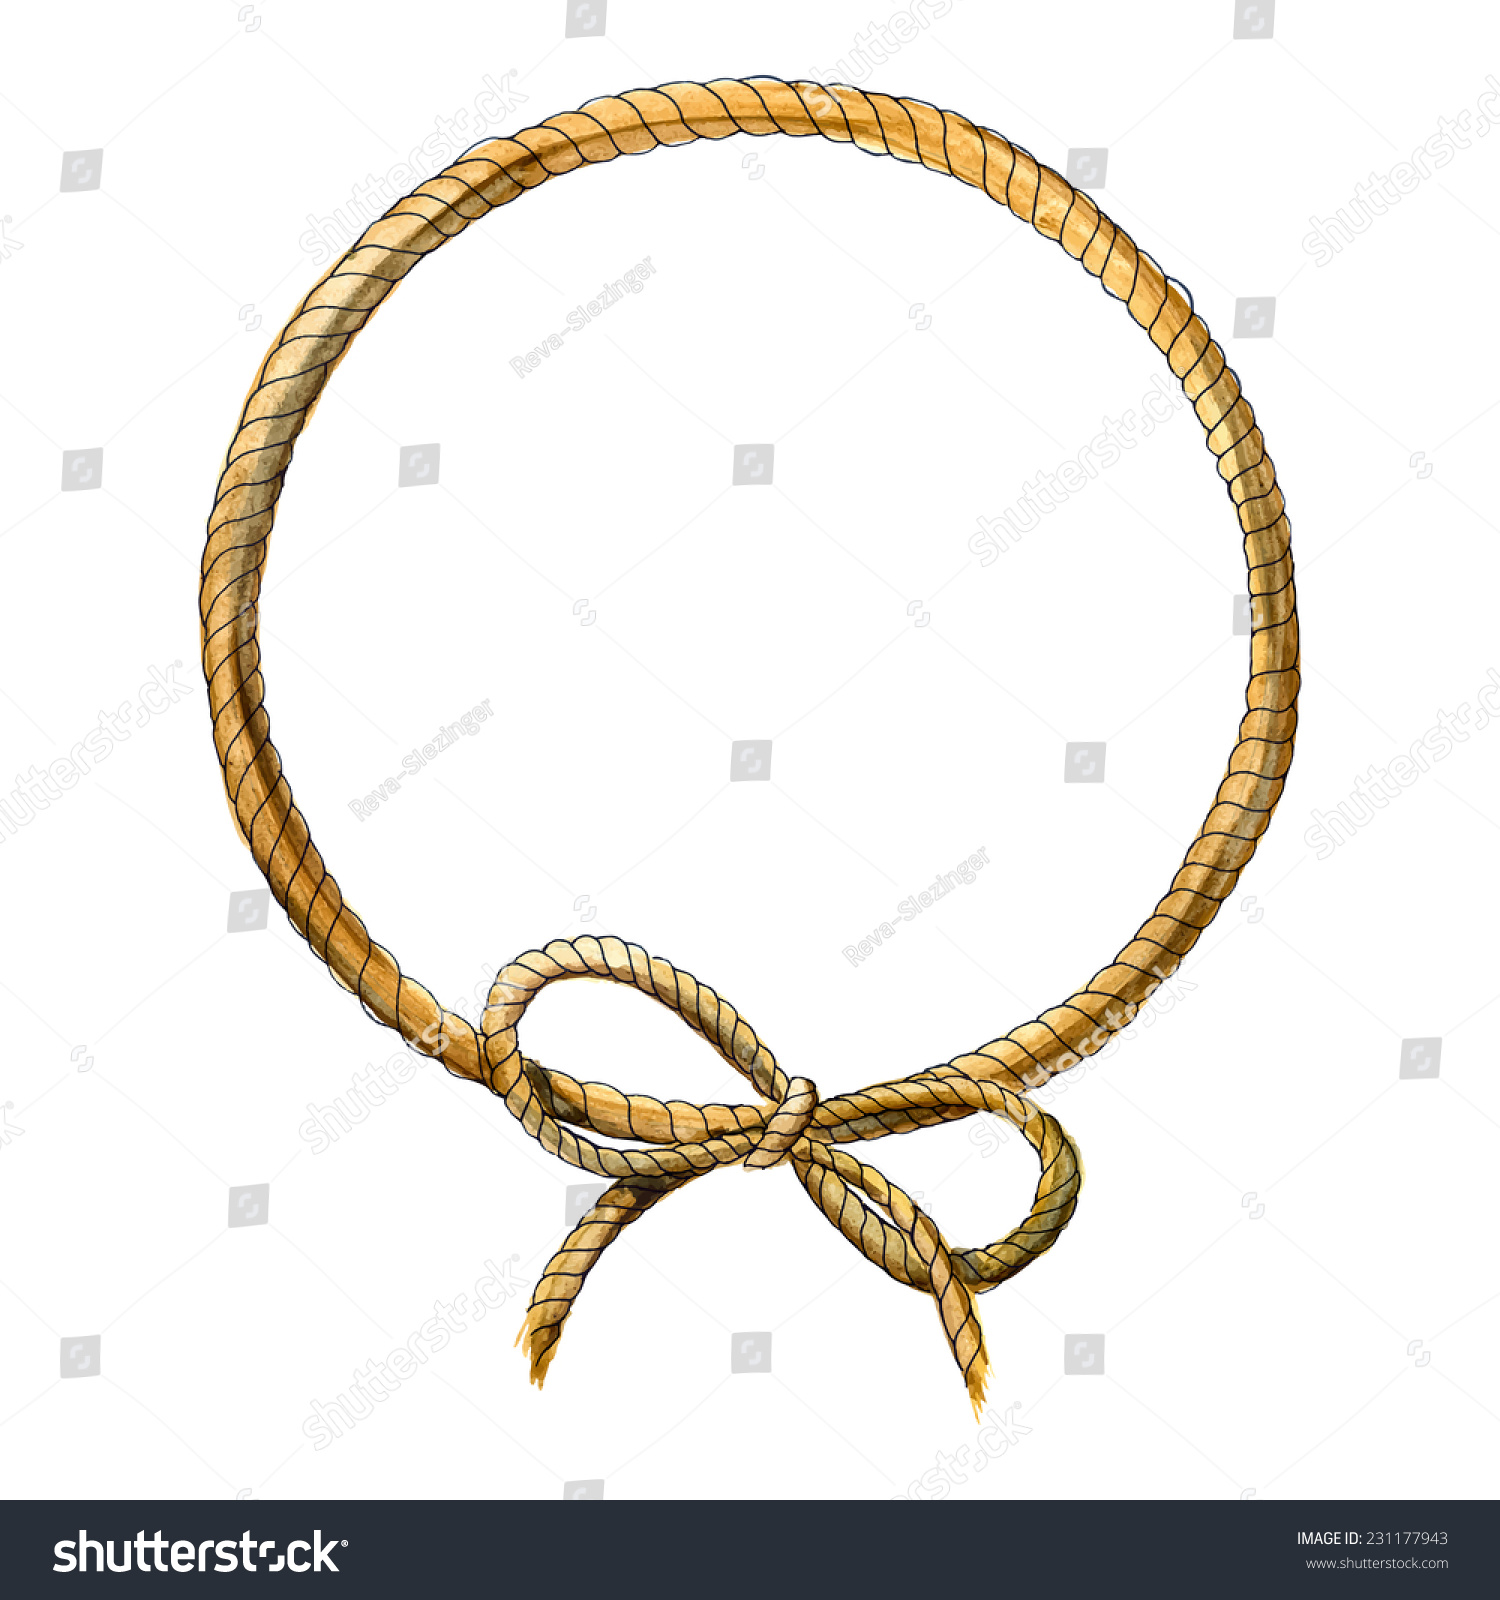 Rope Frame. Rope Wreath.Vector Watercolor Illustration. - 231177943 ...